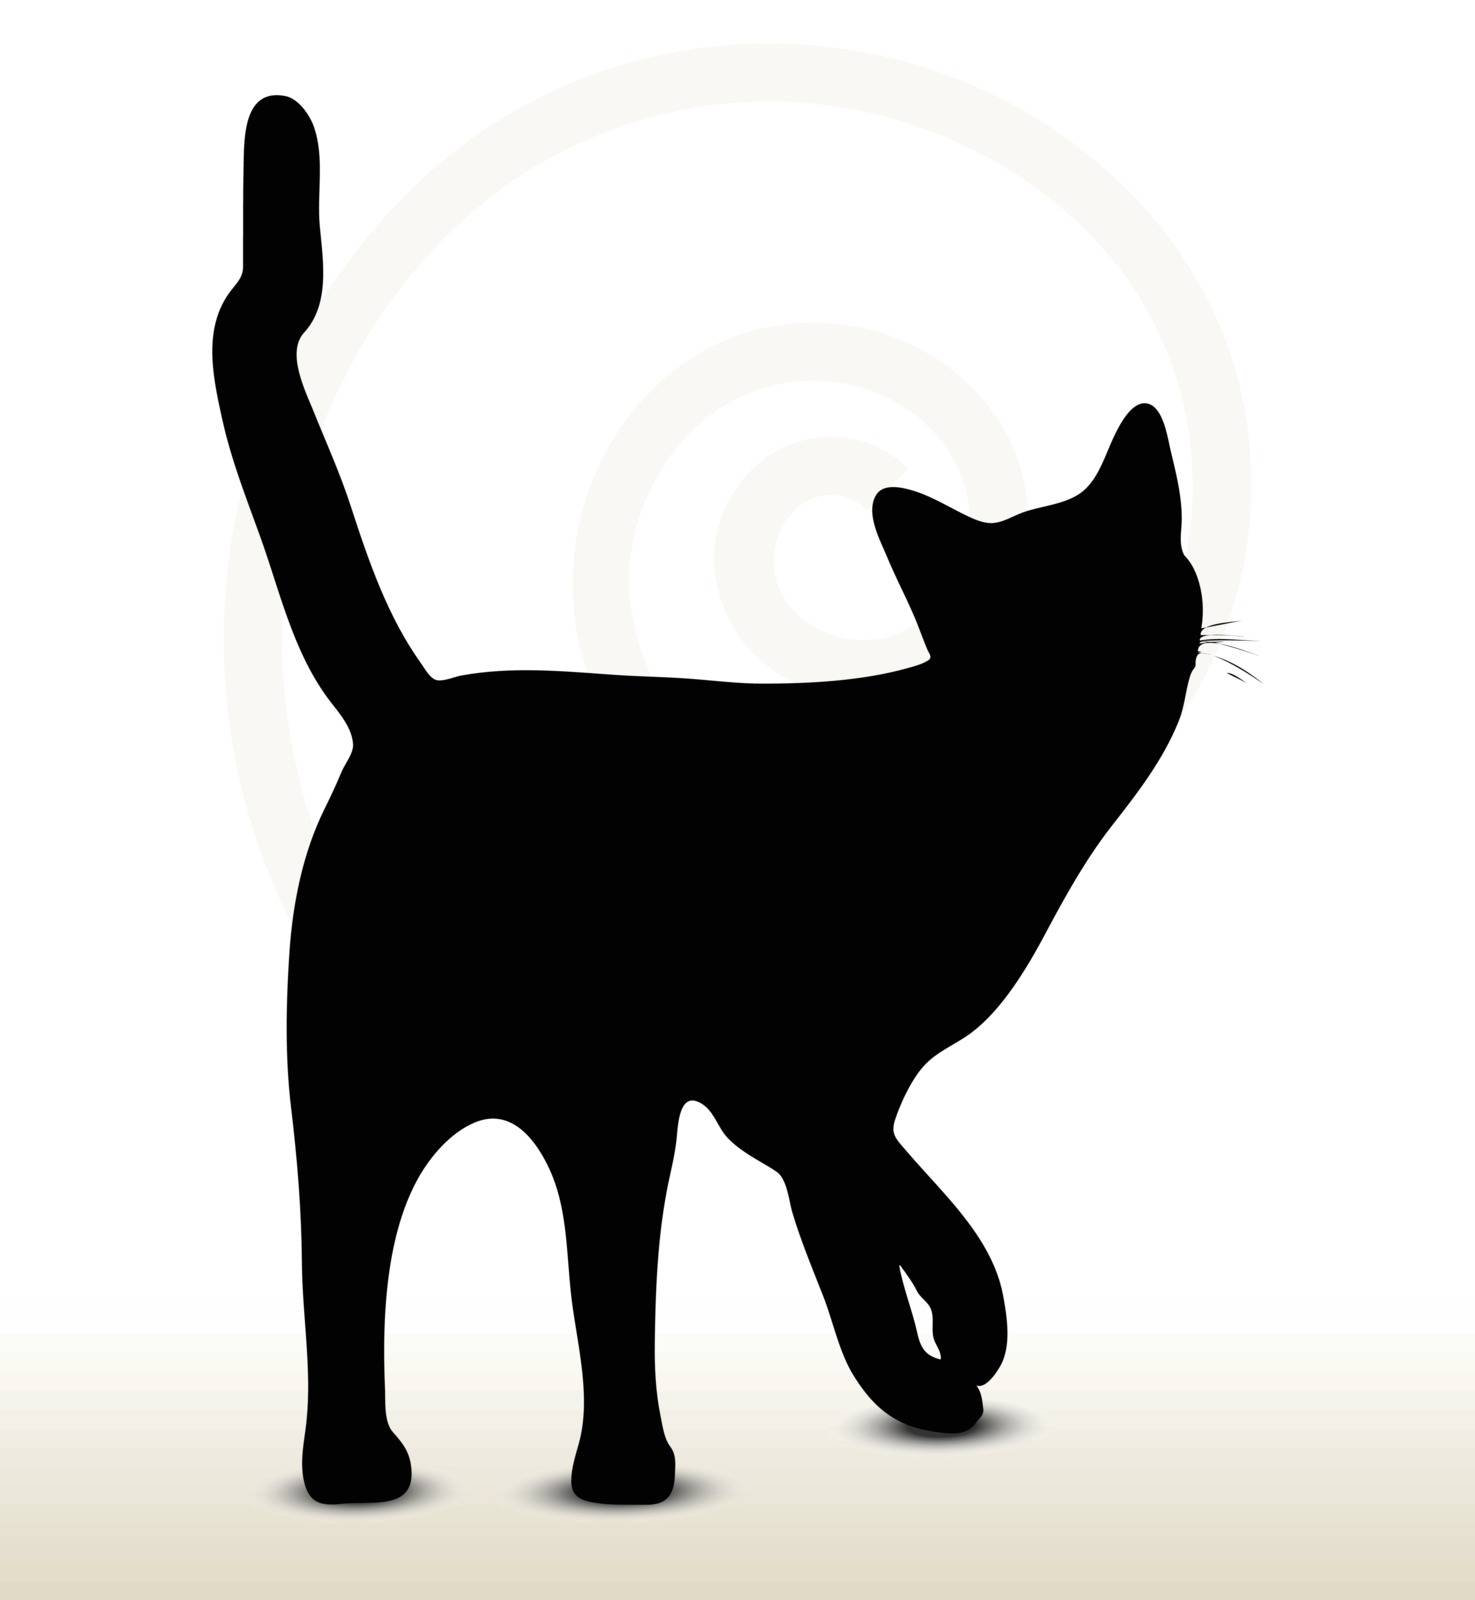 illustration of cat silhouette isolated on white background - in turn-around pose